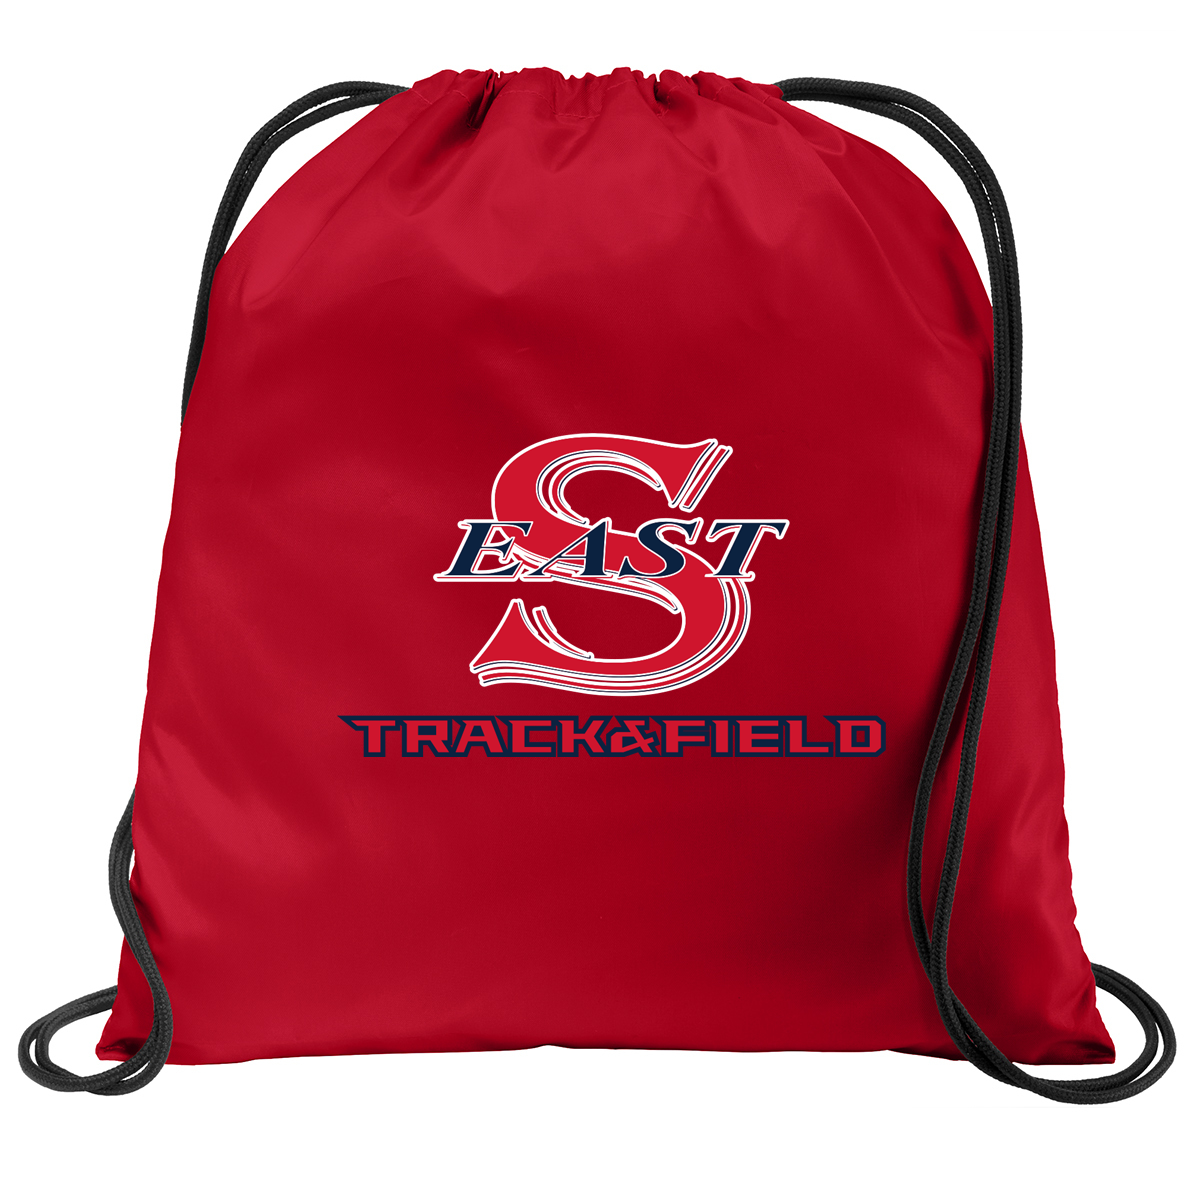 Smithtown East T&F Cinch Pack